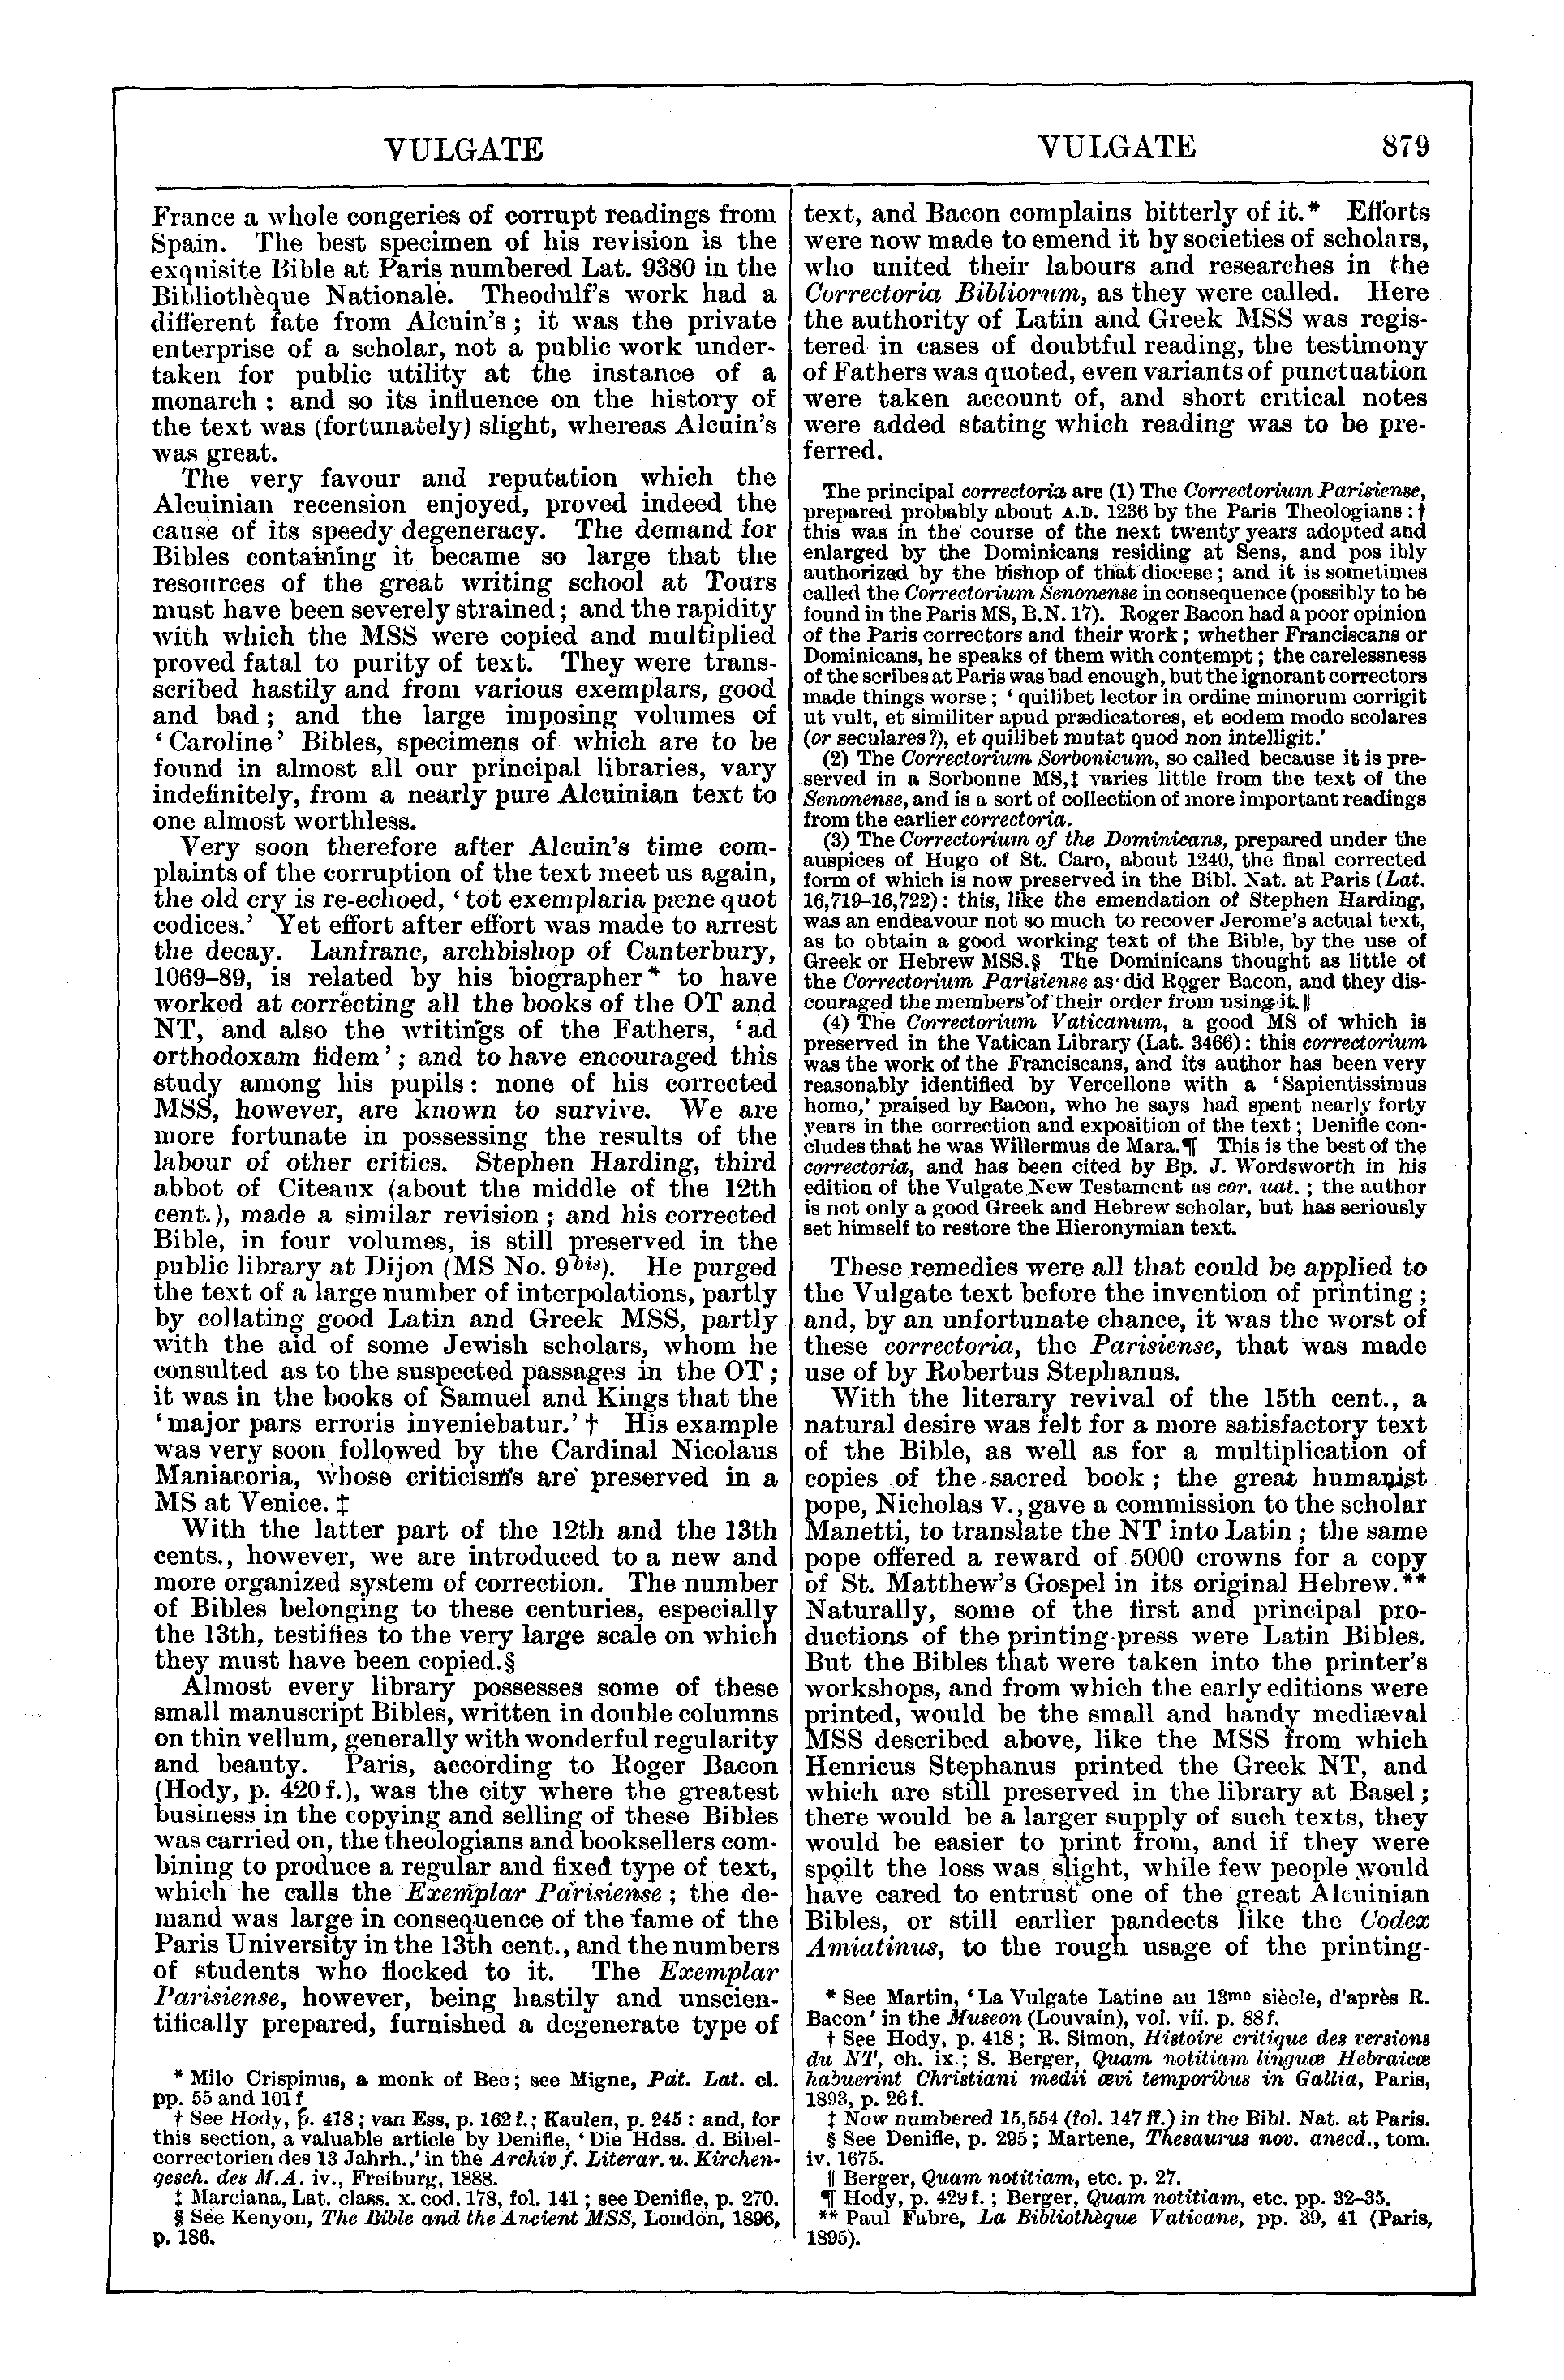 Image of page 879